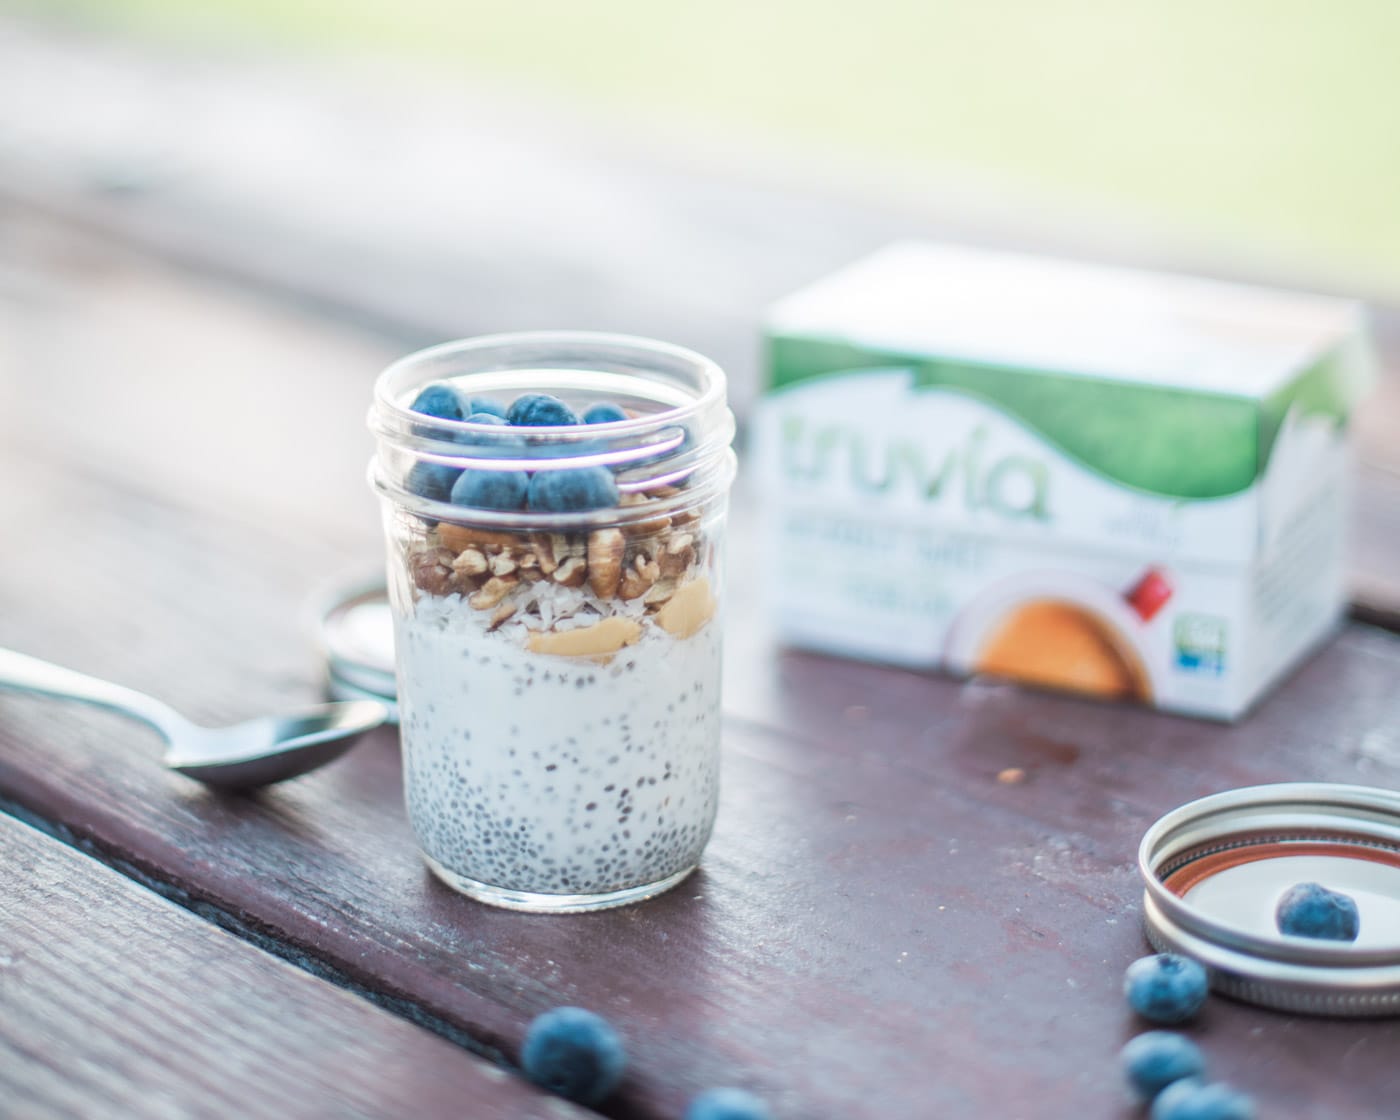 Chia pudding made with Truvia packets